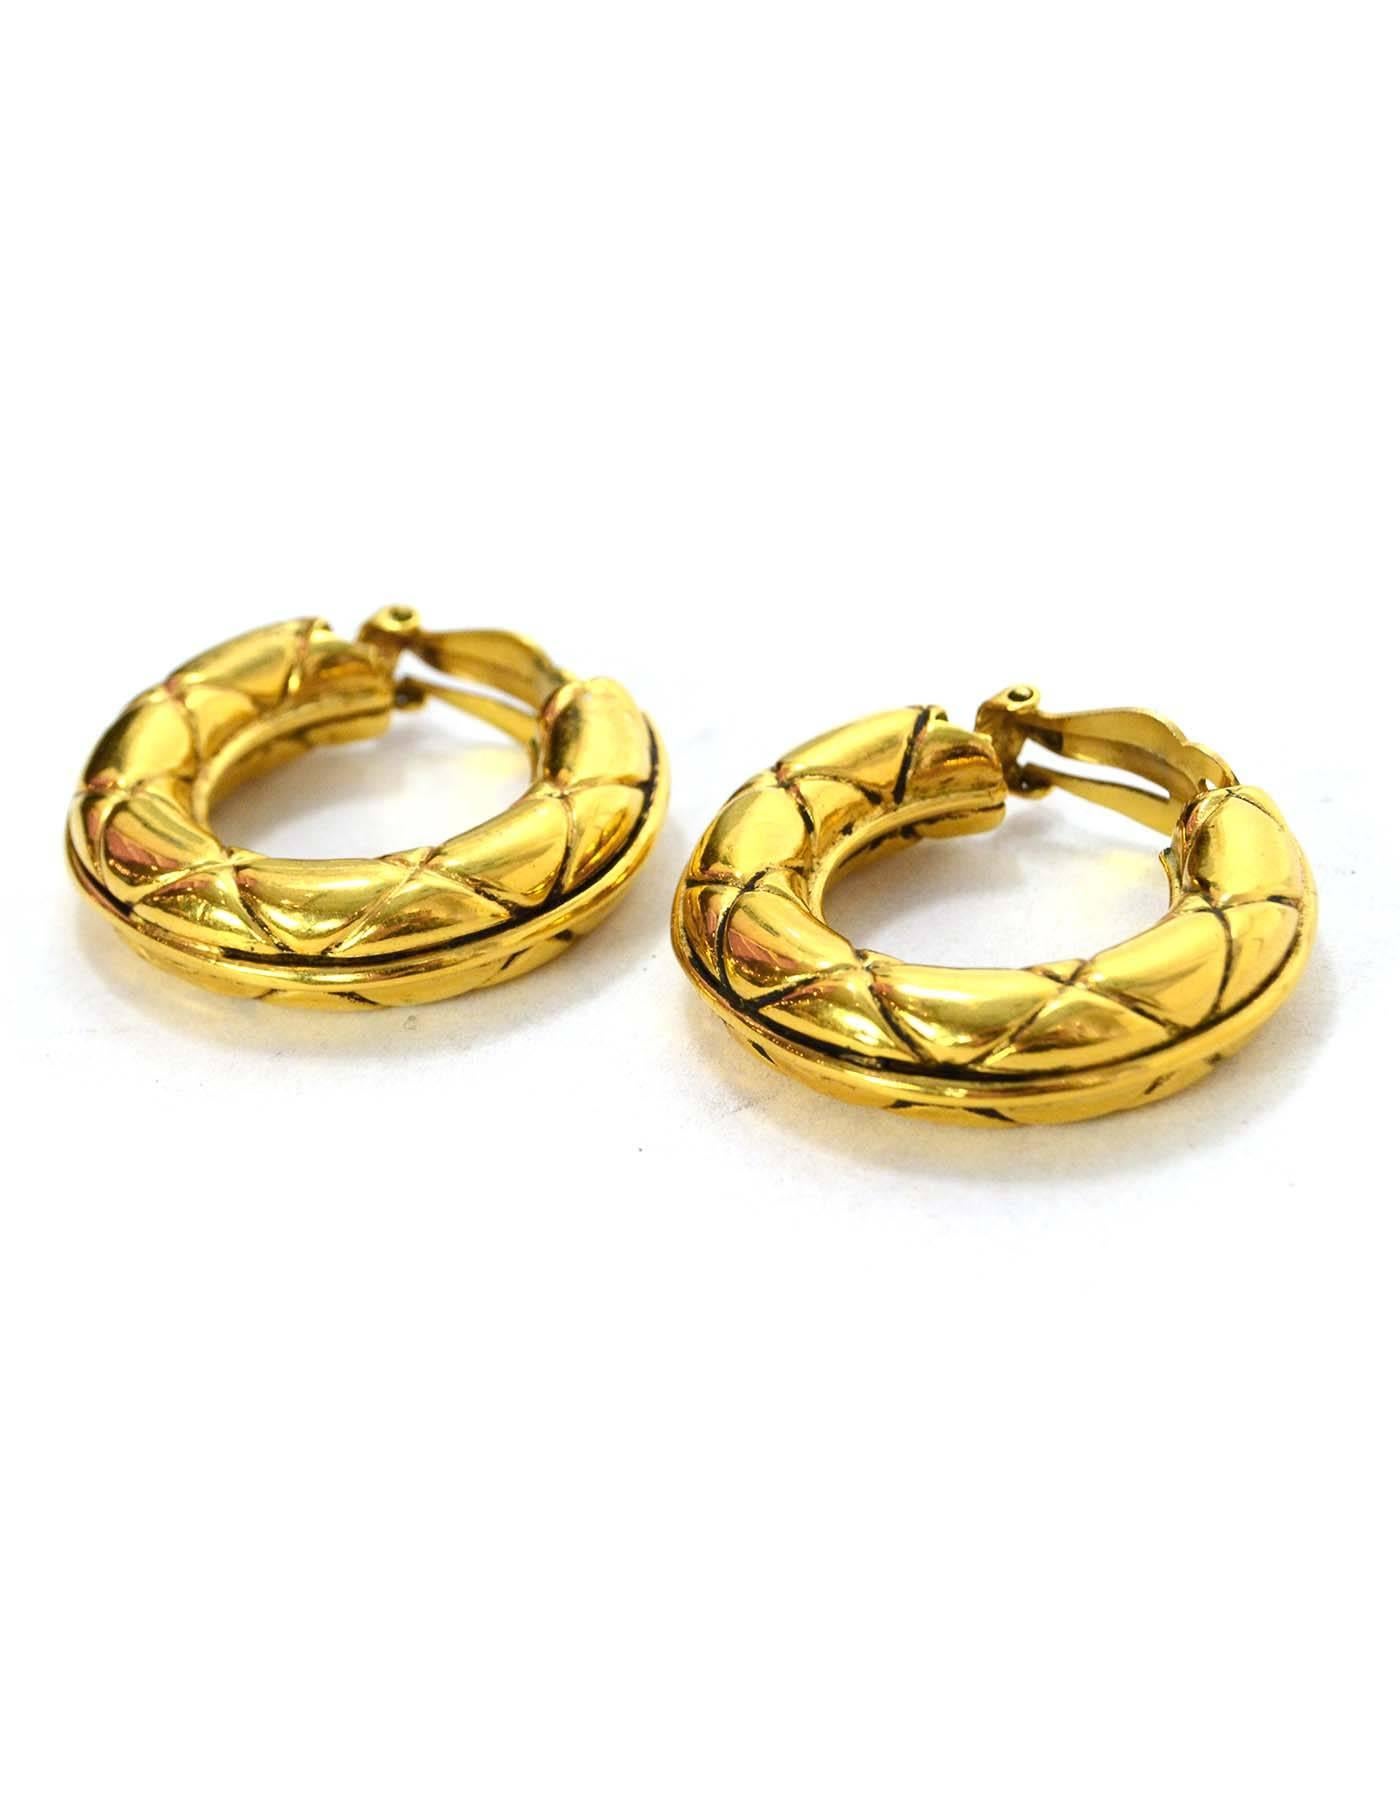 Chanel Gold Quilted Hoop Clip On Earrings
Color: Goldtone
Materials: Metal
Closure: Clip on
Overall Condition:  Excellent vintage, pre-owned condition with the exception of missing stamp
Measurements: 
Length: 1.35”
Width: .5